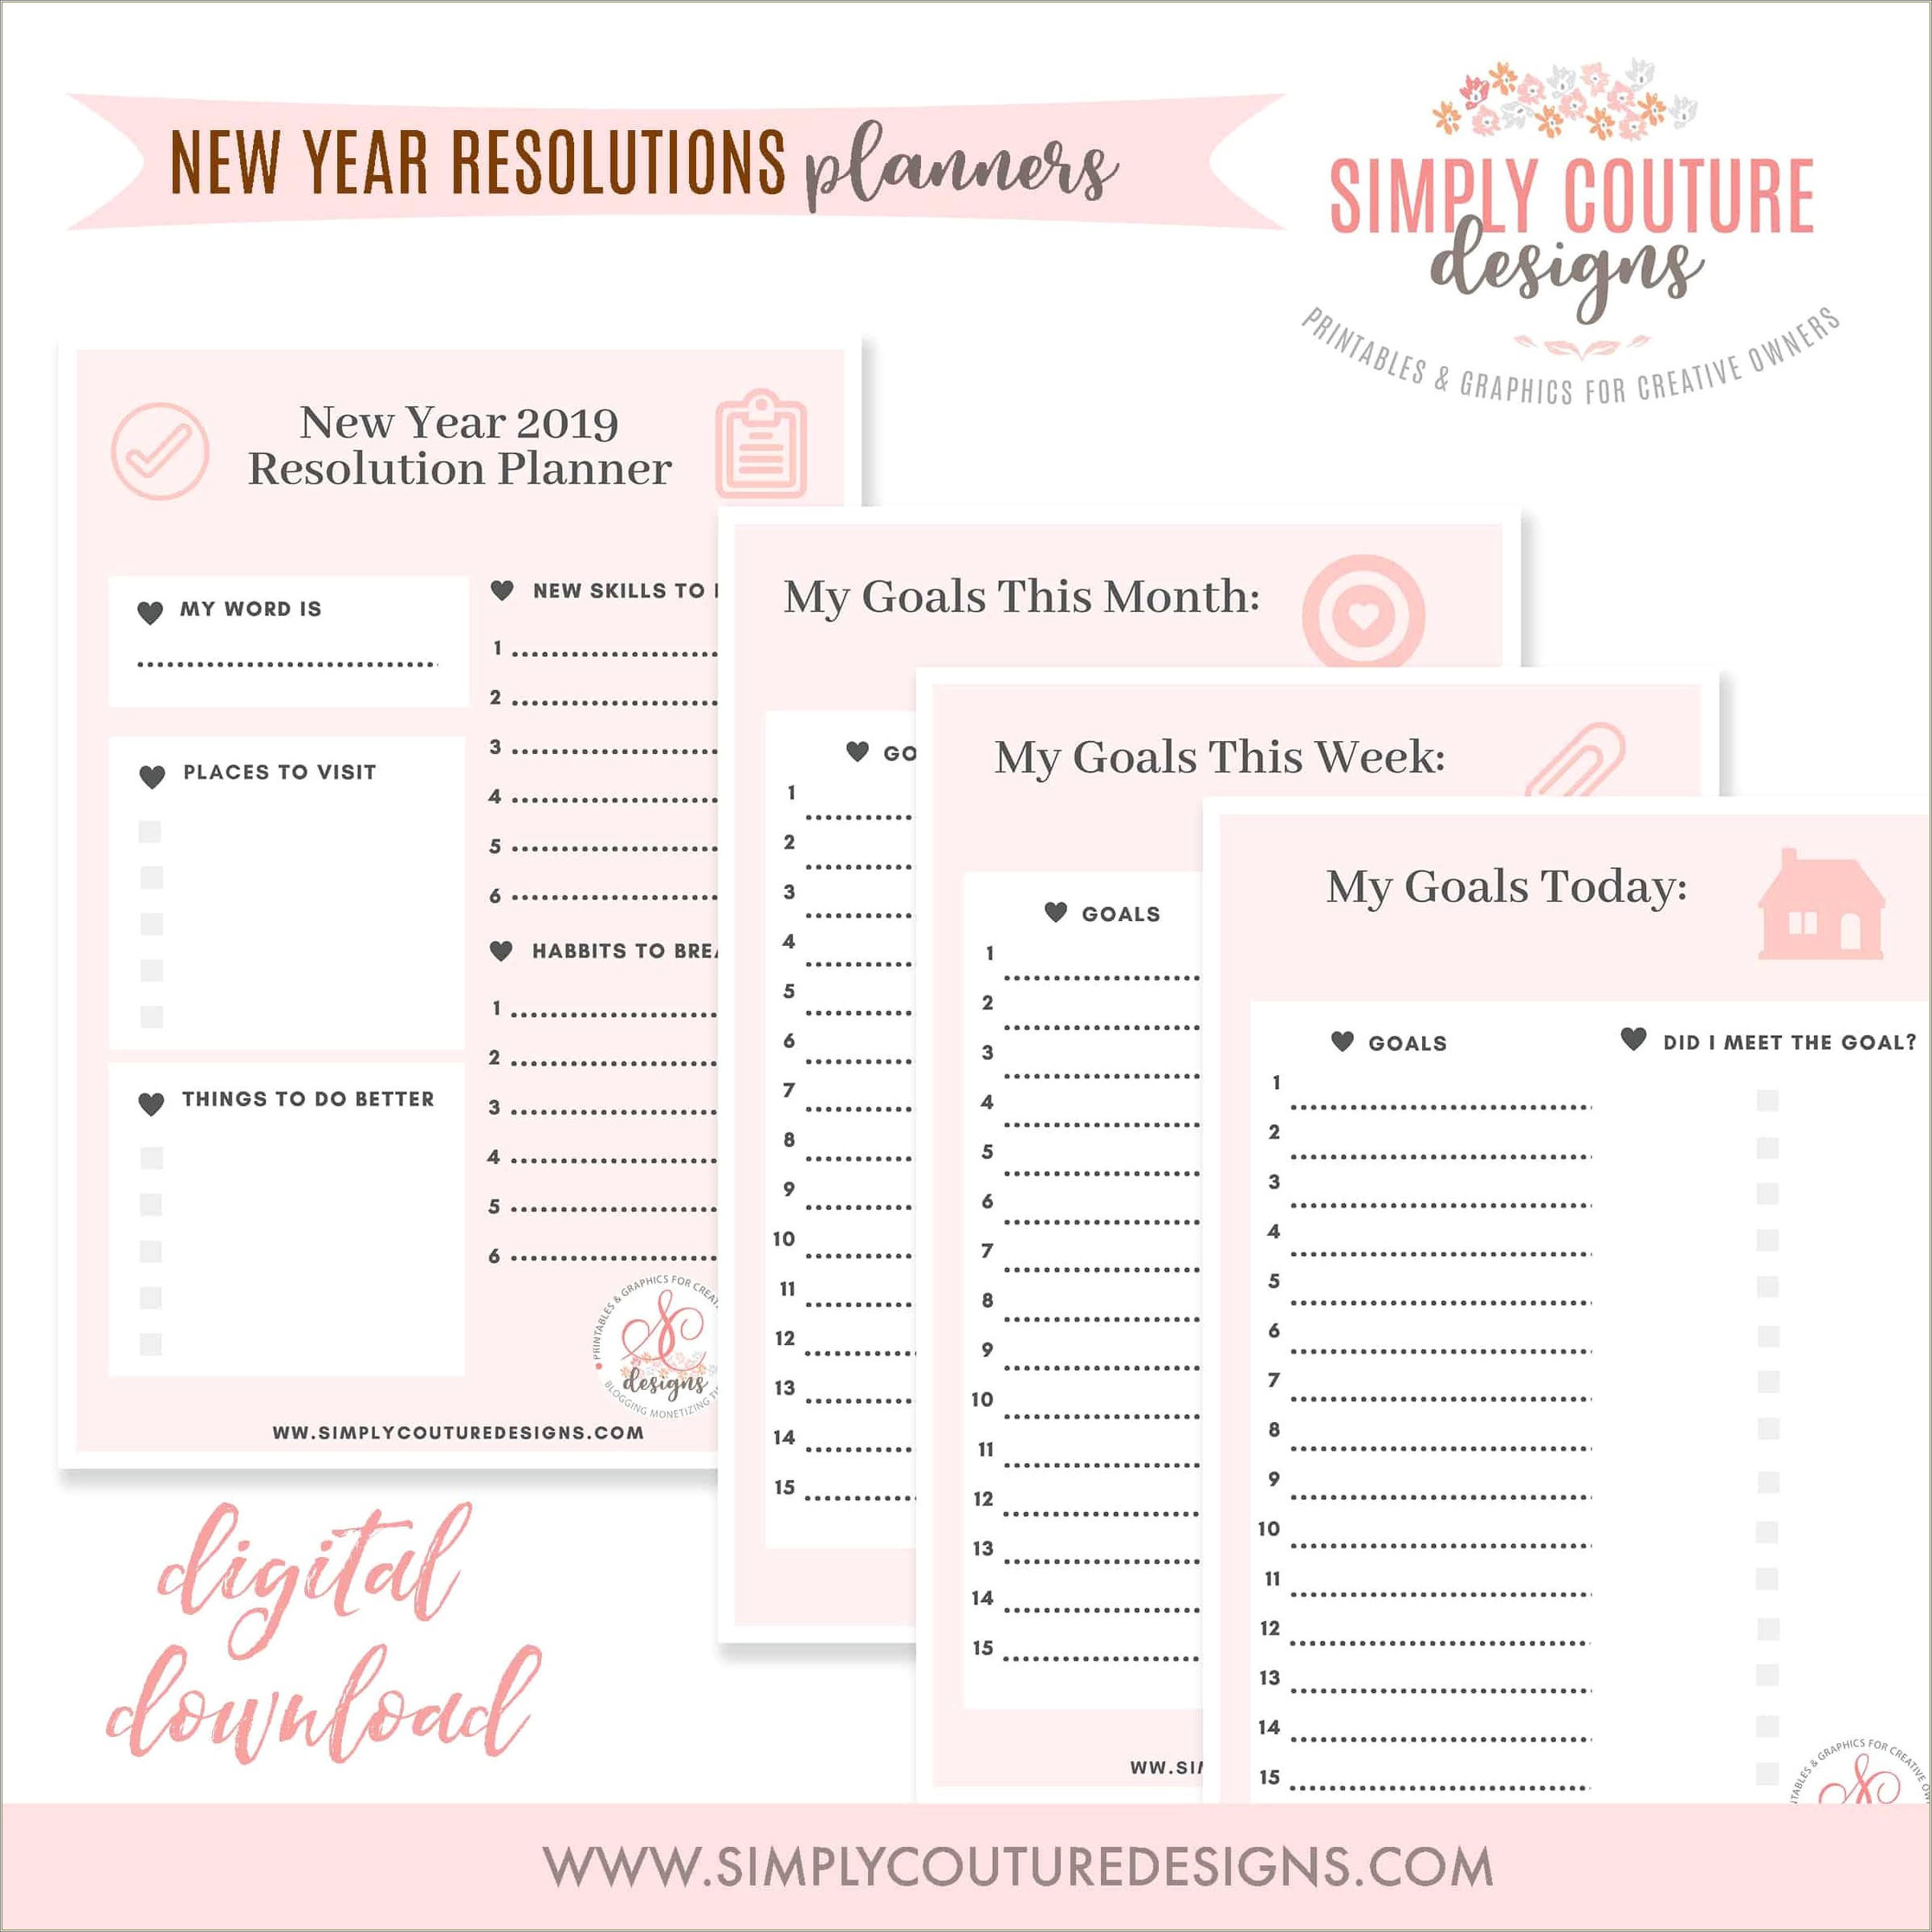 Free 2019 New Year's Resolution Template